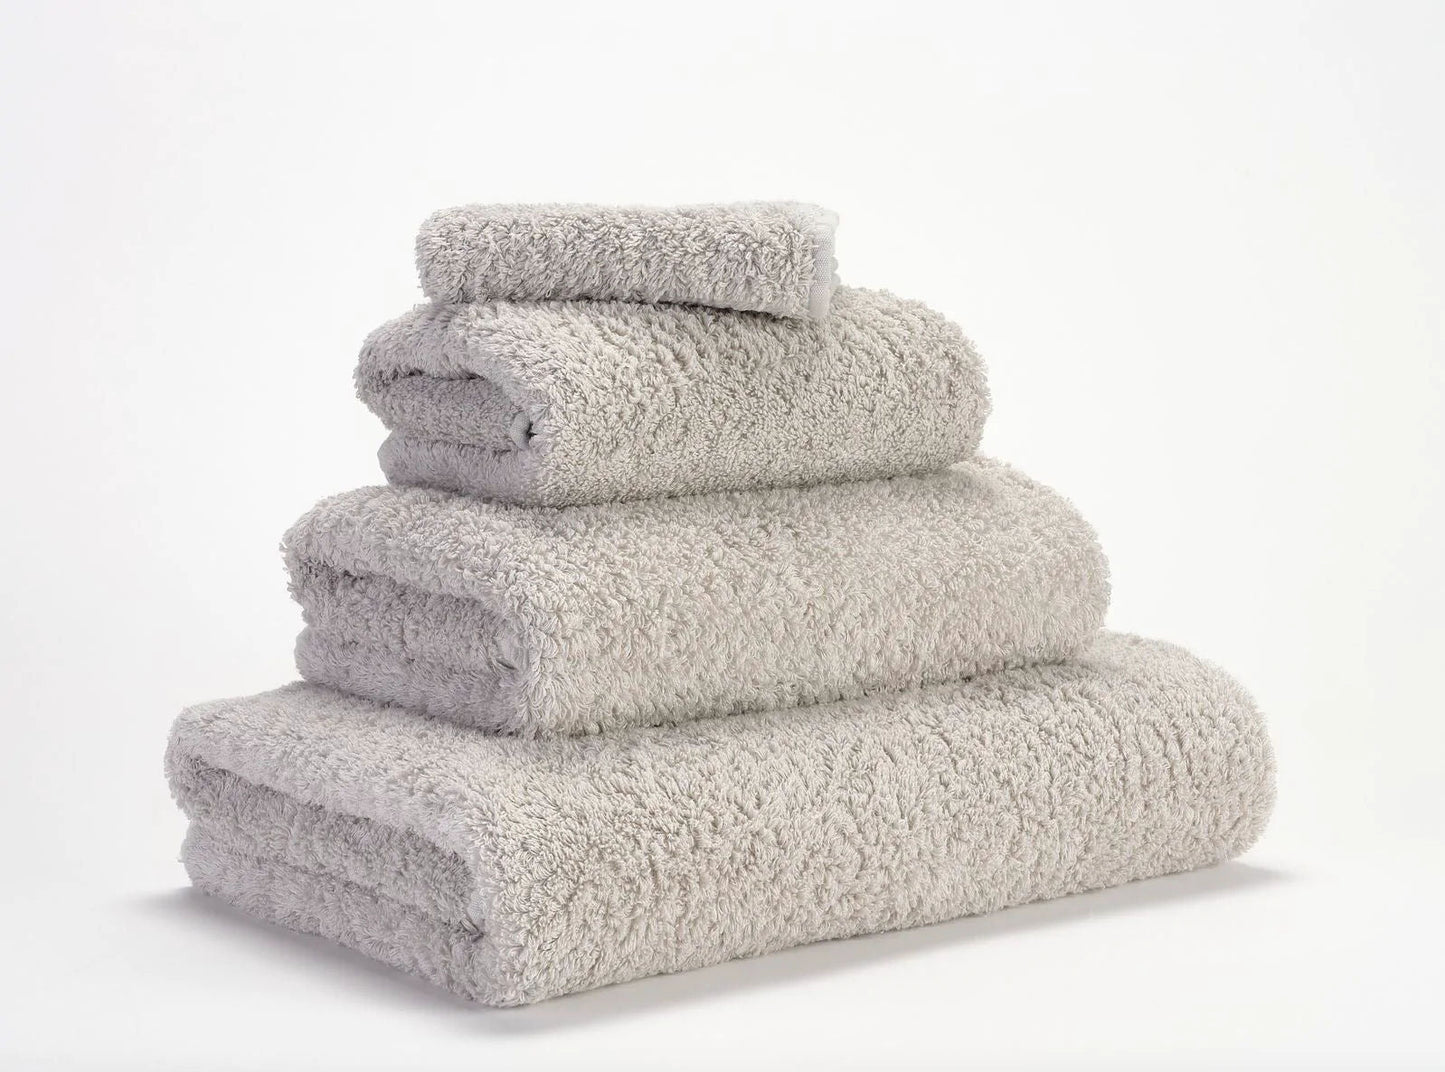 Super Pile Grey Bath Towels by Abyss & Habidecor | 950 Cloud - |VESIMI Design| Luxury and Rustic bathrooms online